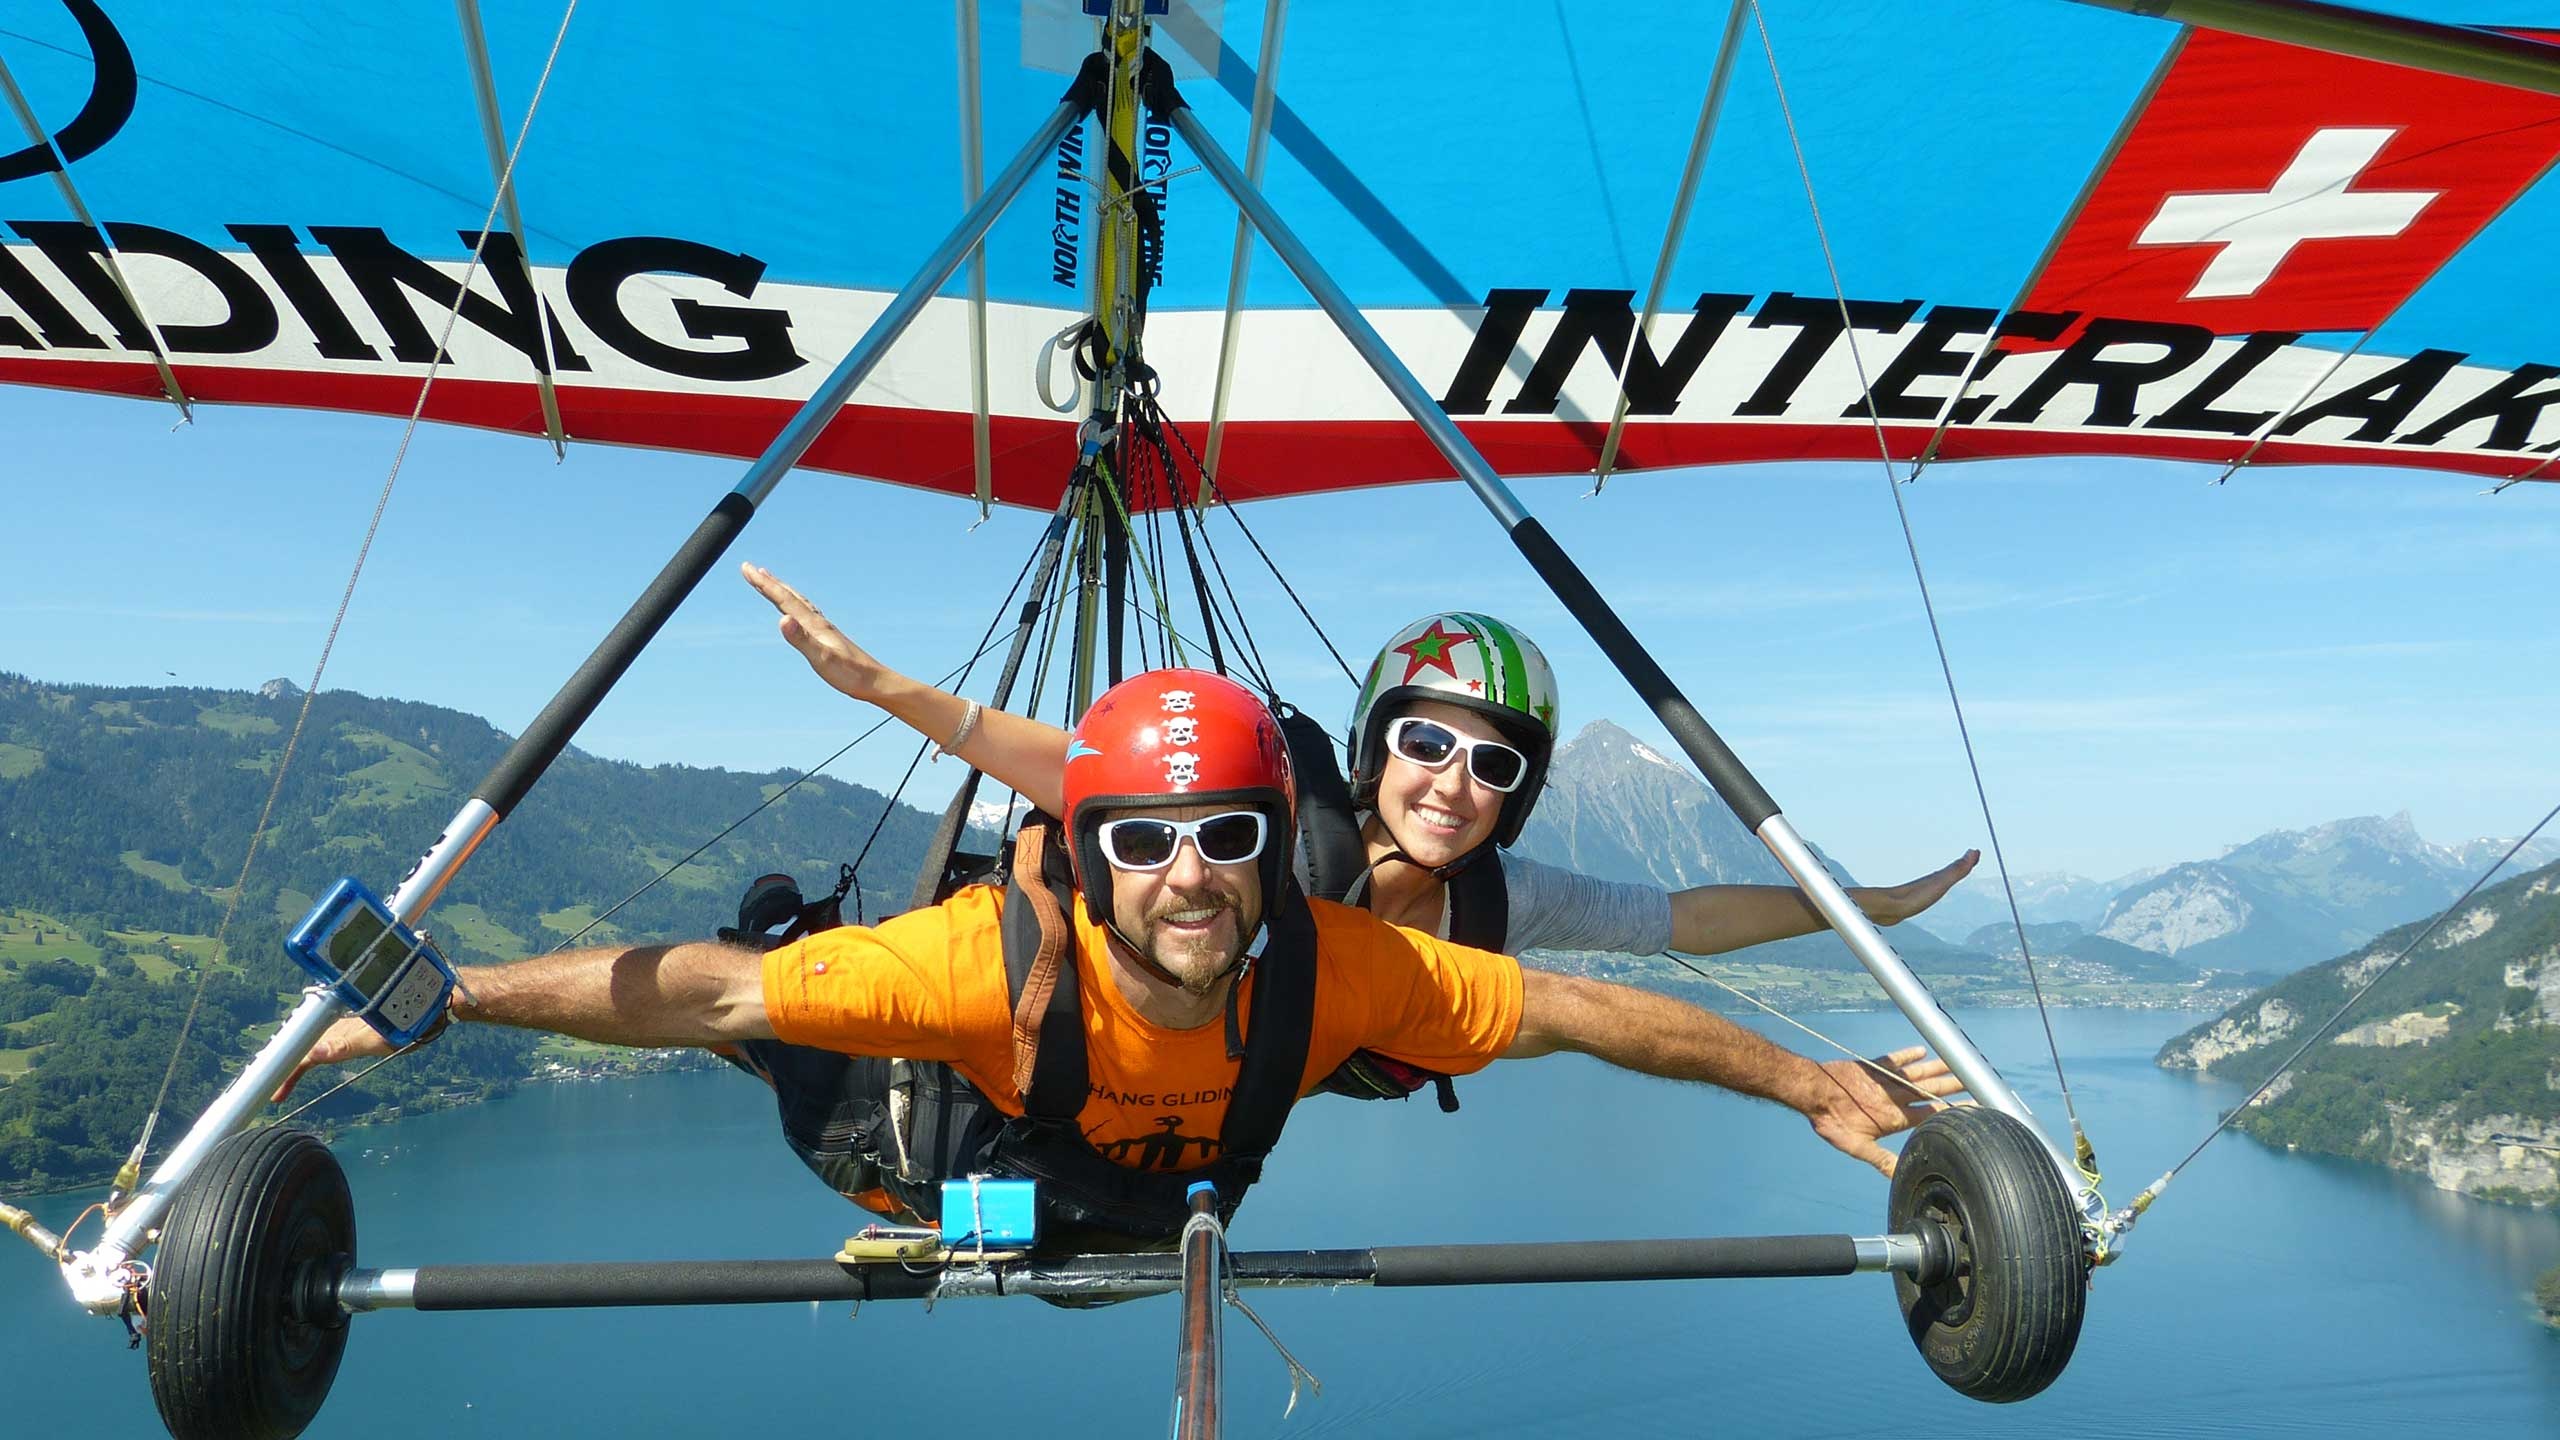 Hang Gliding: The tandem lesson, A certified hang gliding instructor, Rigid-winged hang glider. 2560x1440 HD Wallpaper.